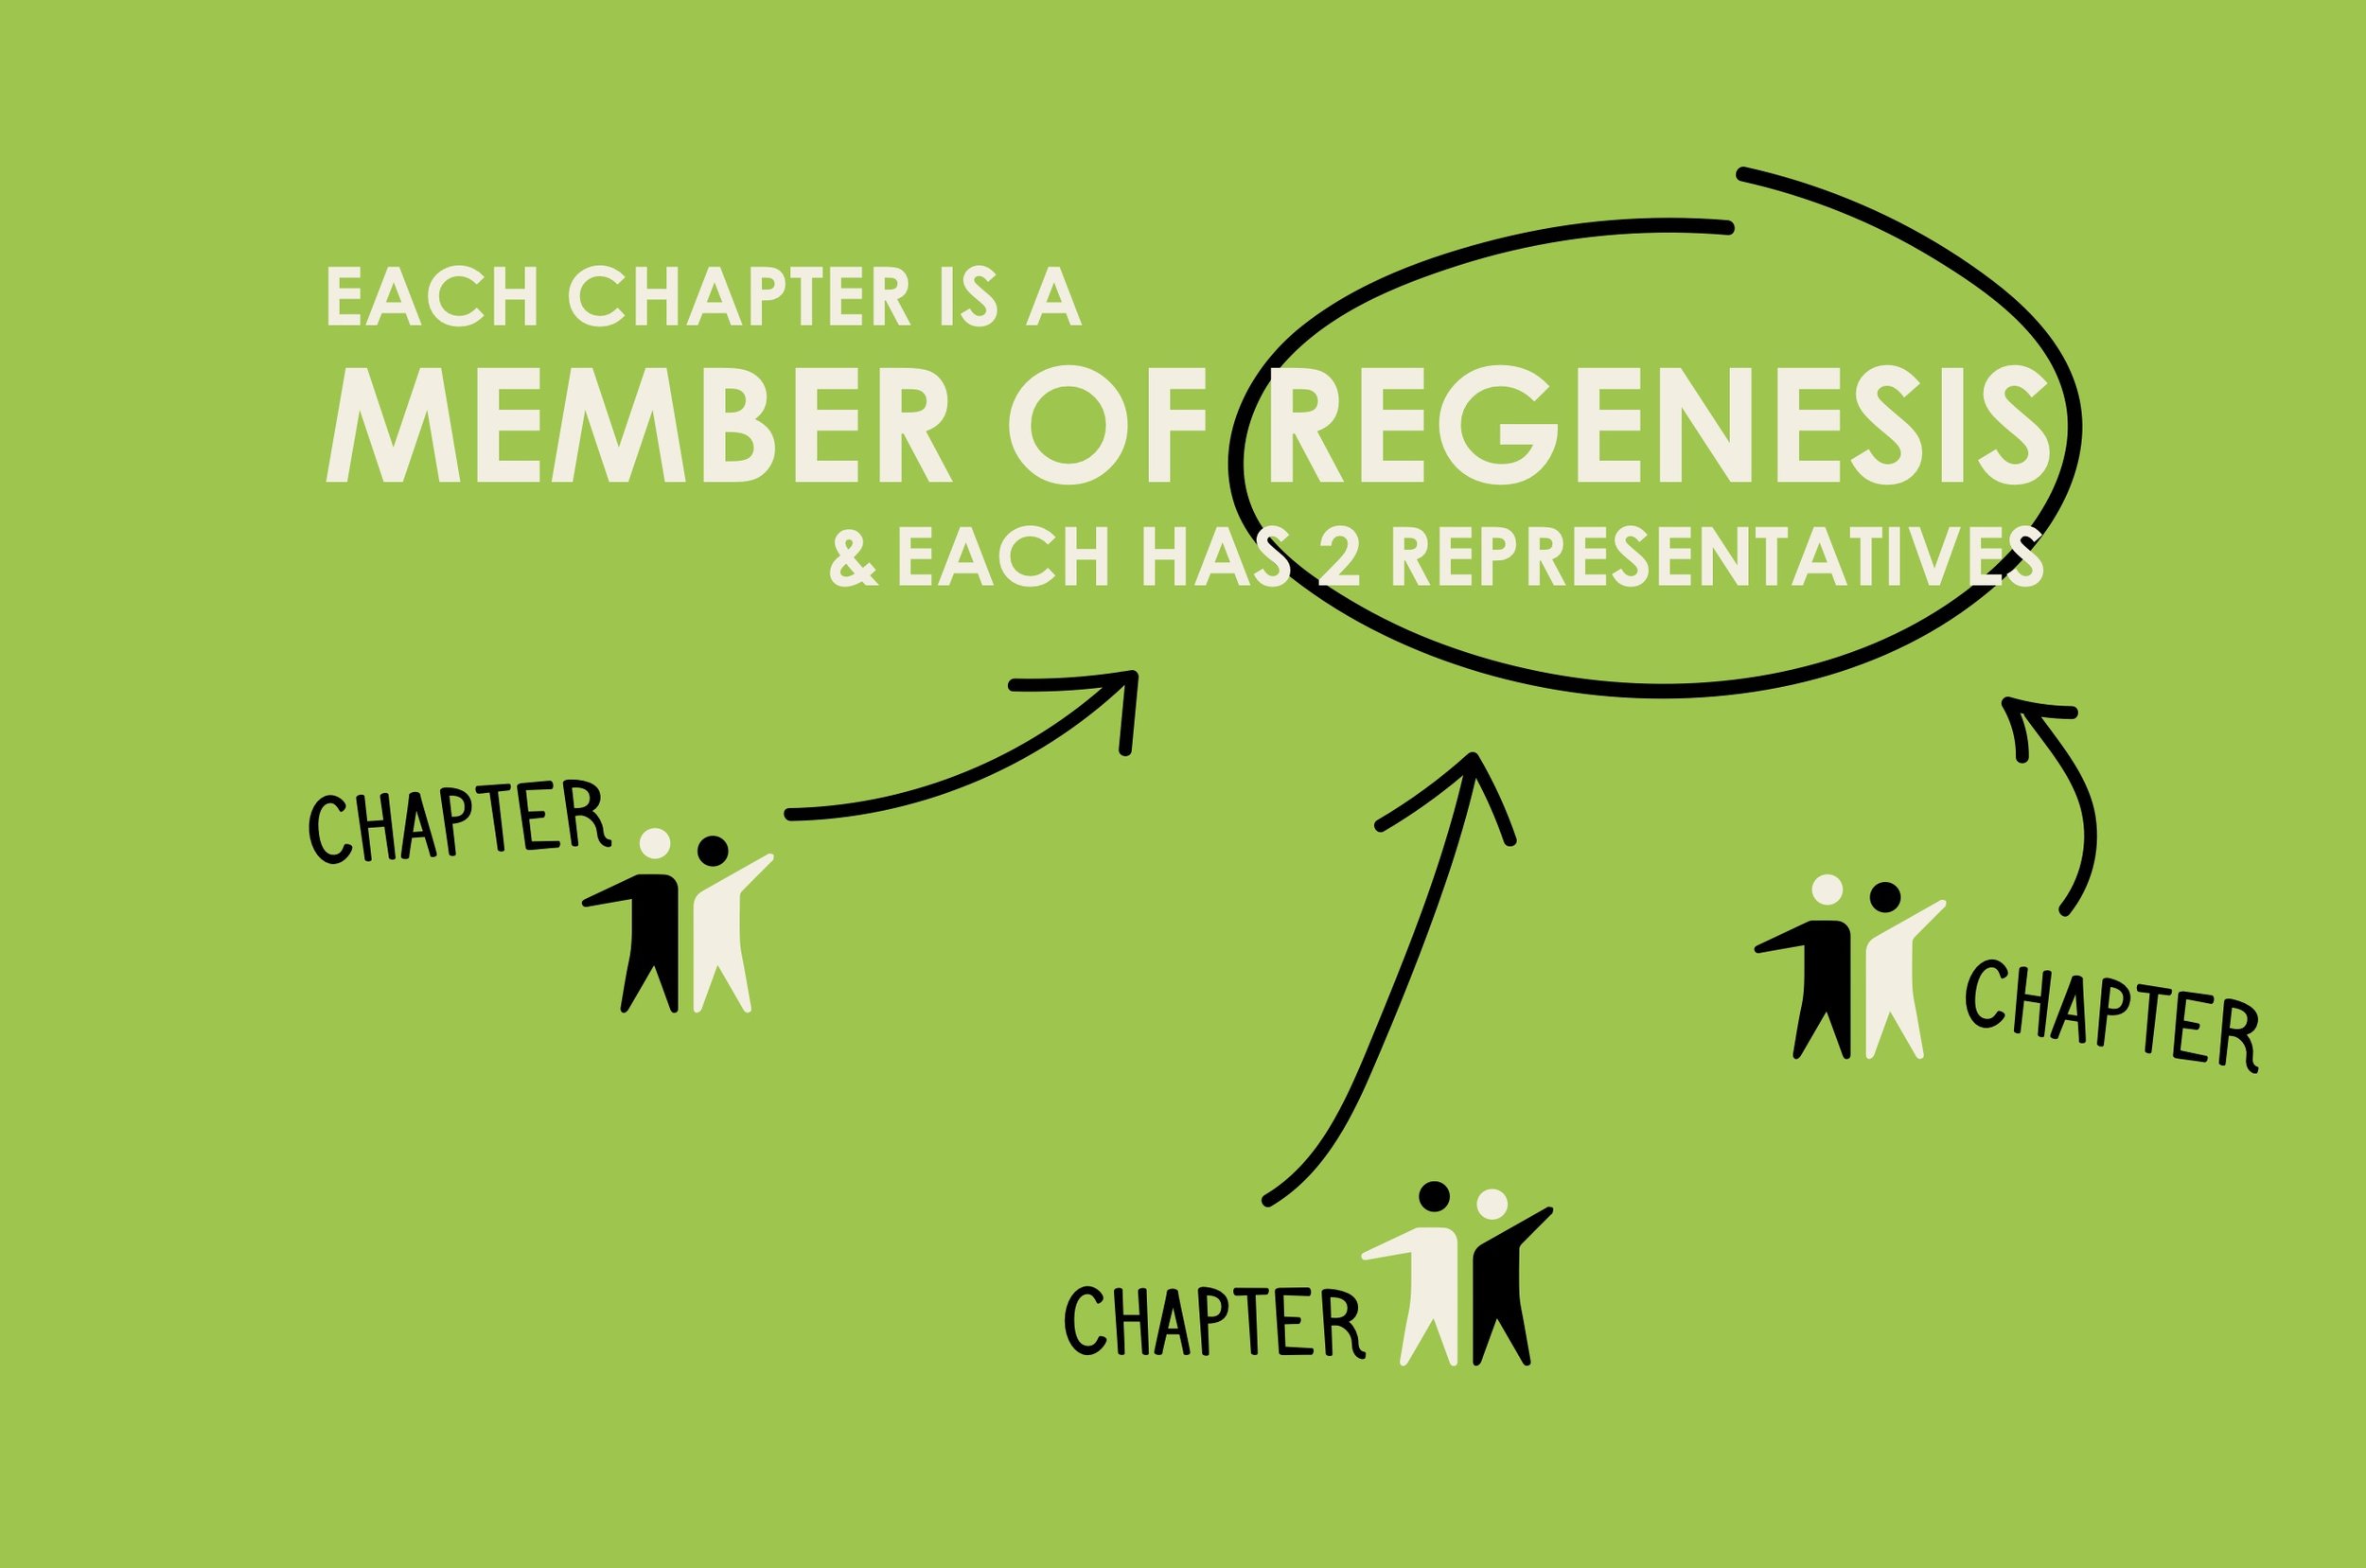 Each chapter is a member of Regenesis and each has 2 representatives.